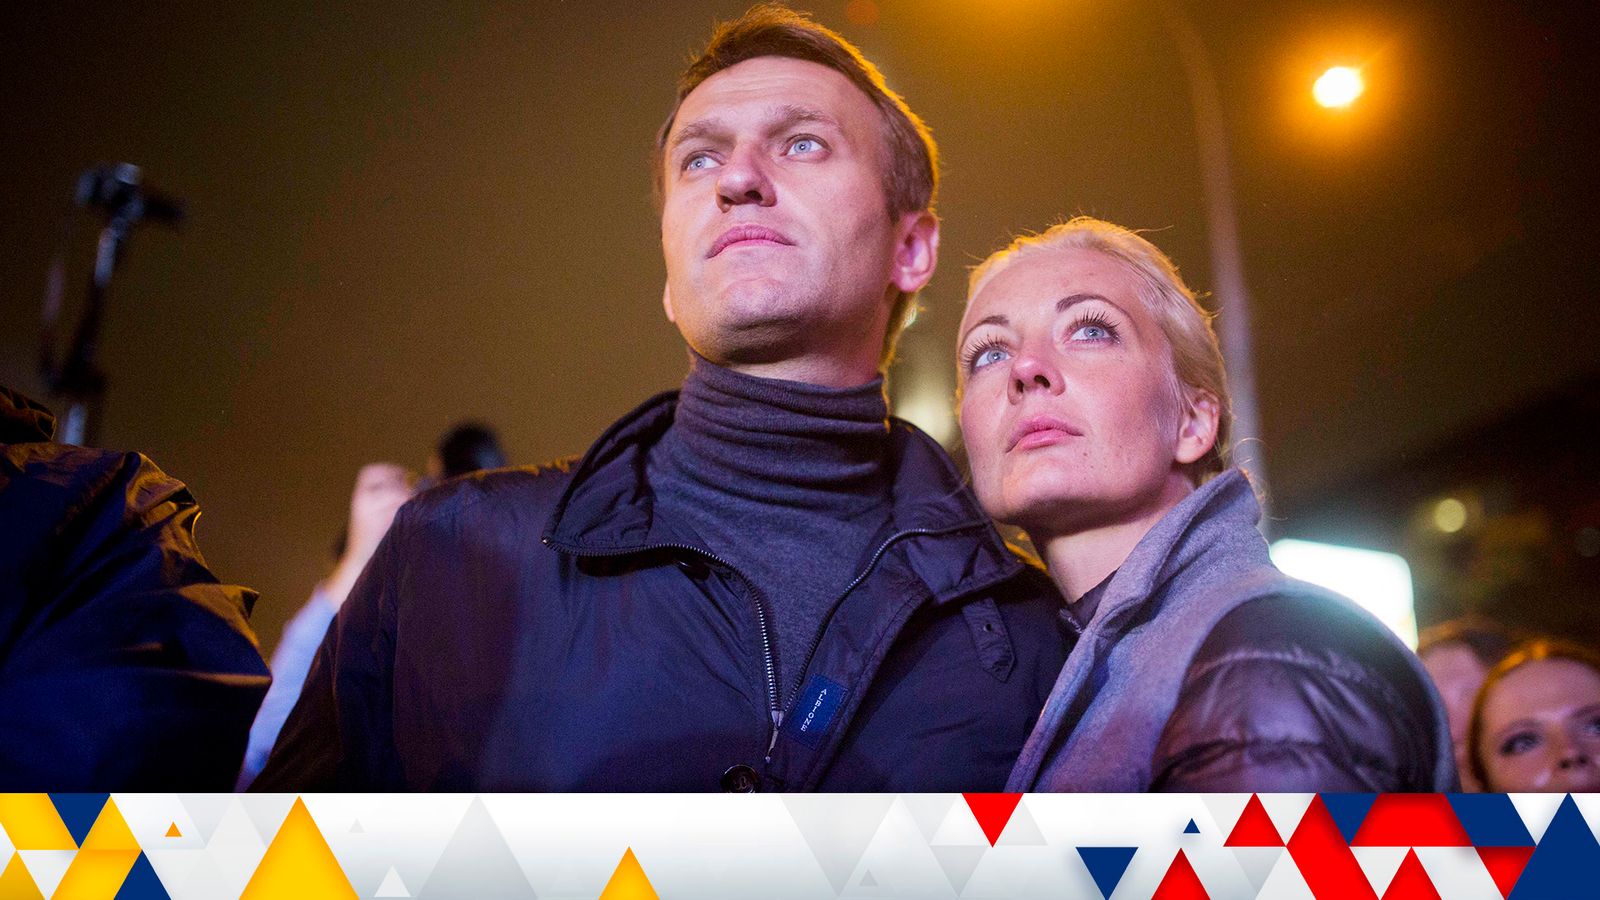 Ukraine-Russia war latest: Russia claims victory over key village; X explains why it suspended Navalny’s wife